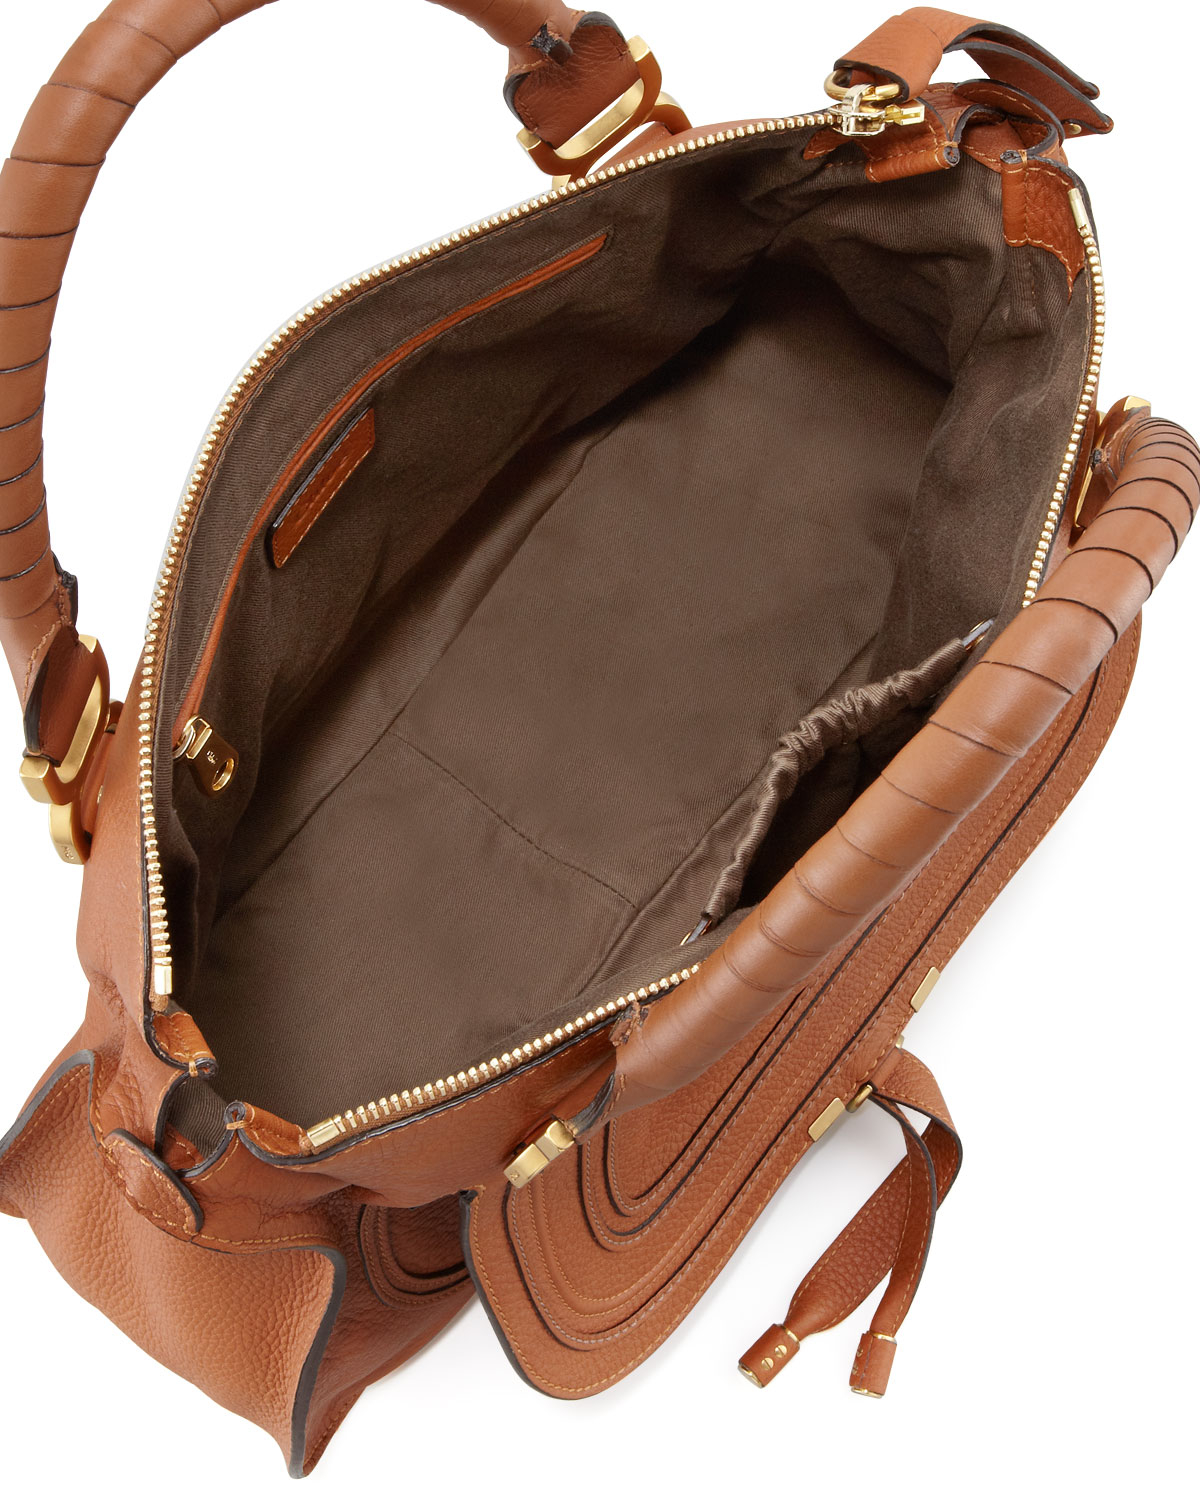 Lyst - Chloé Marcie Large Leather Satchel Bag in Brown